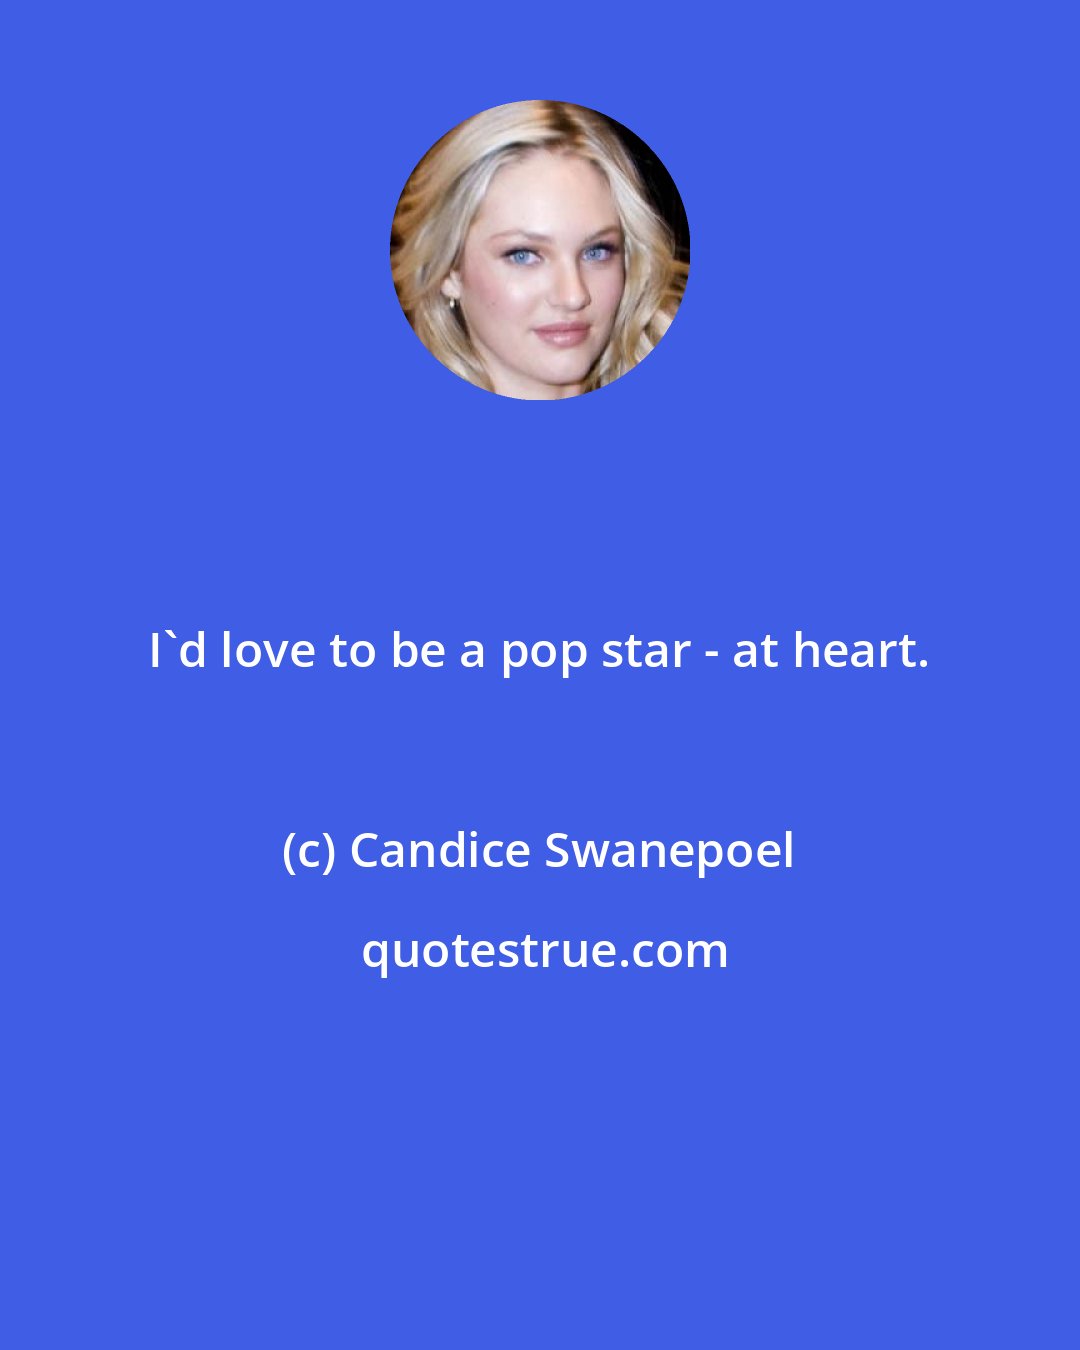 Candice Swanepoel: I'd love to be a pop star - at heart.